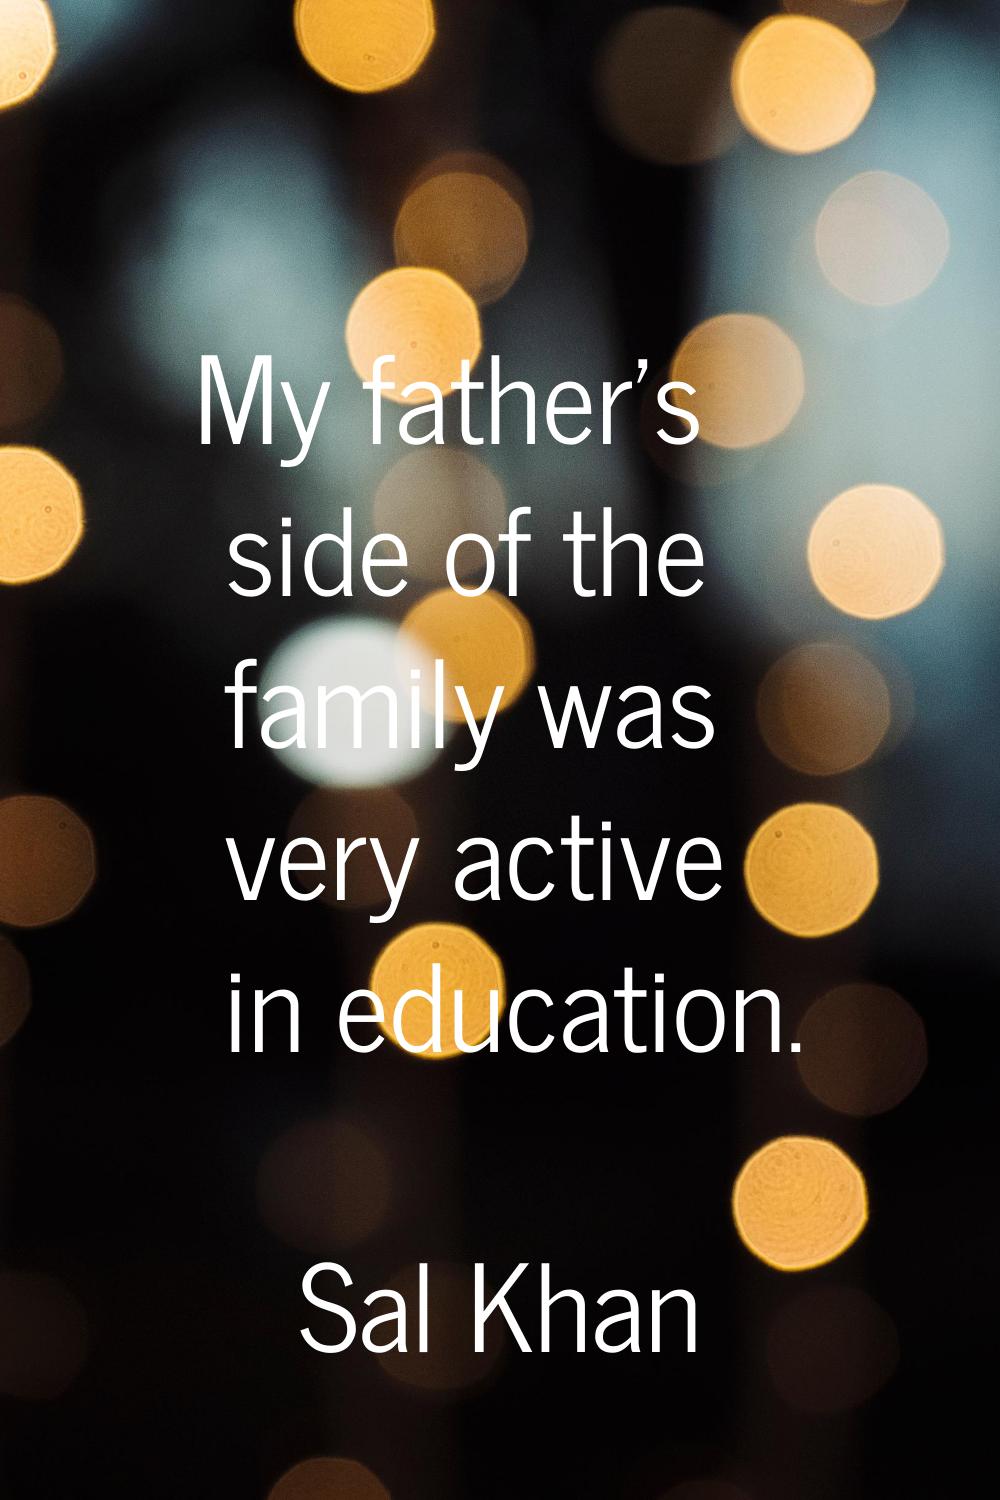 My father's side of the family was very active in education.